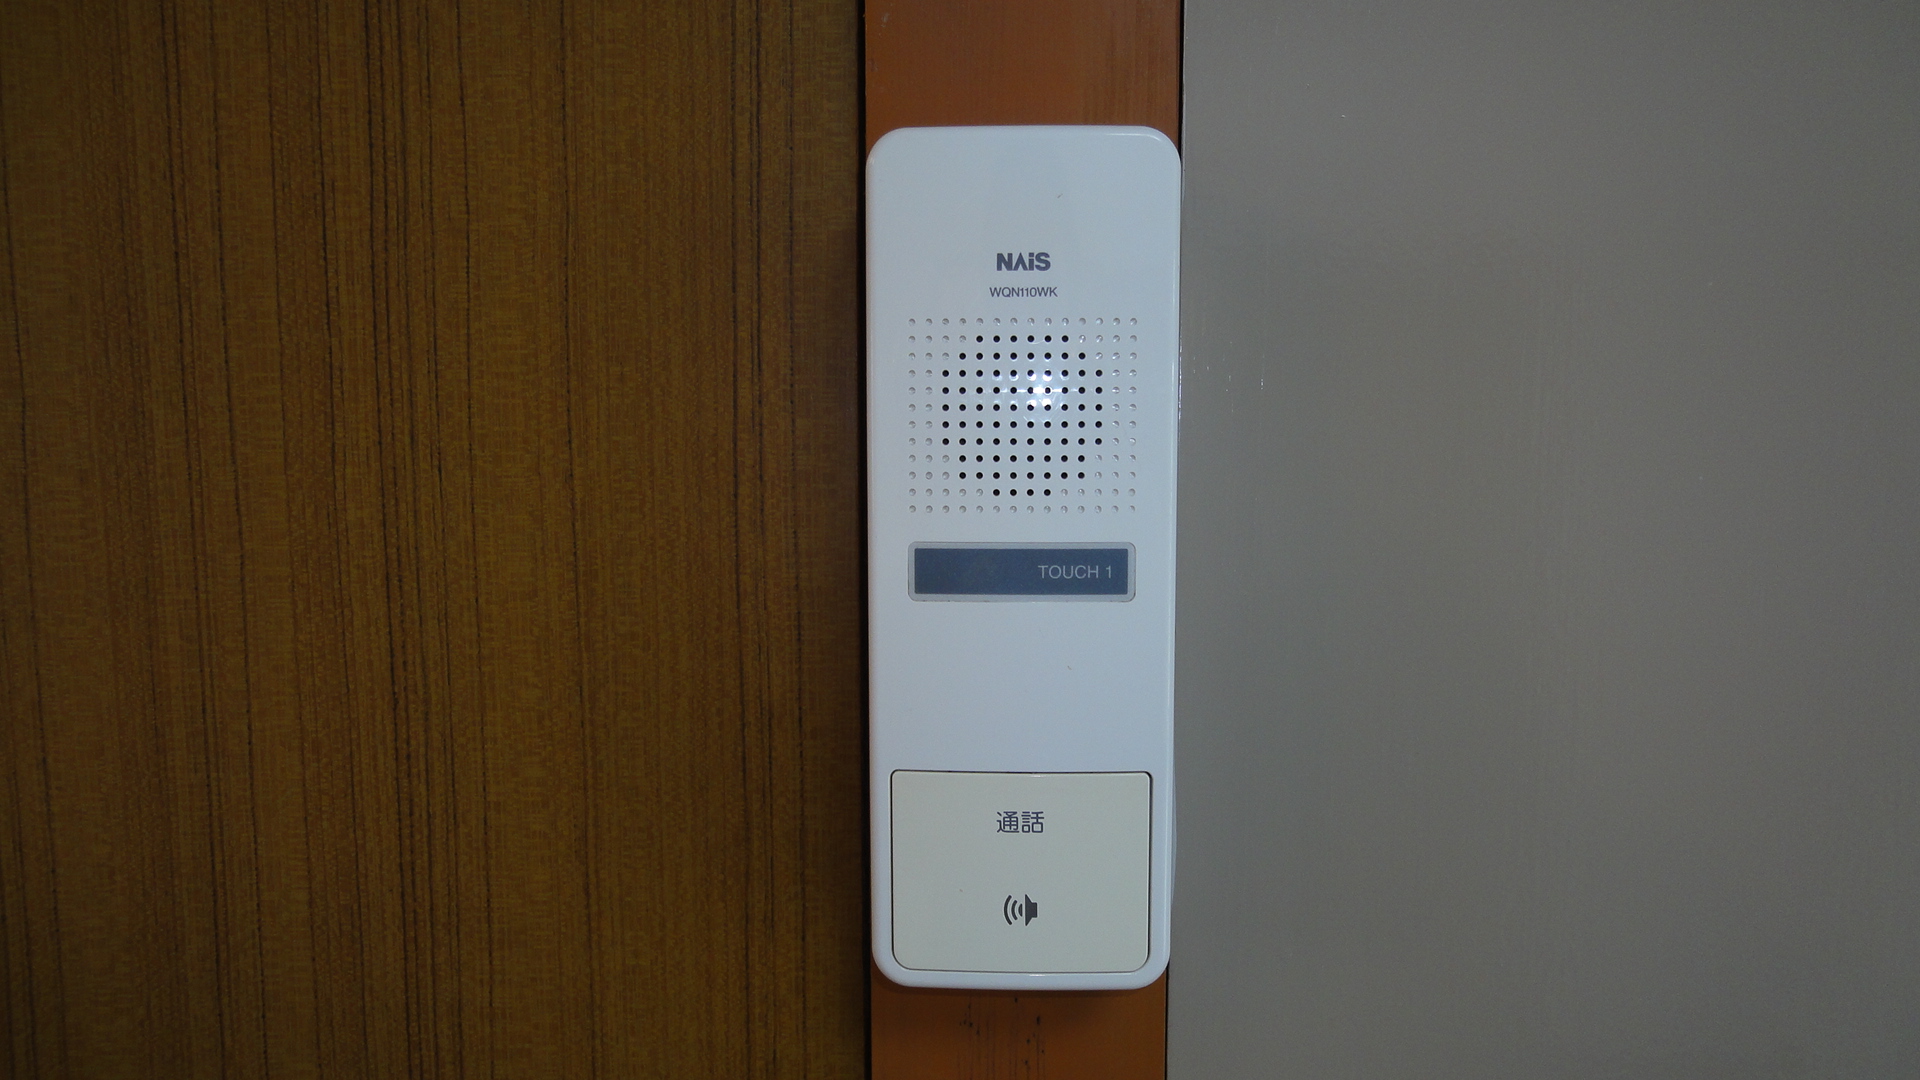 Security. It is with a convenient intercom.